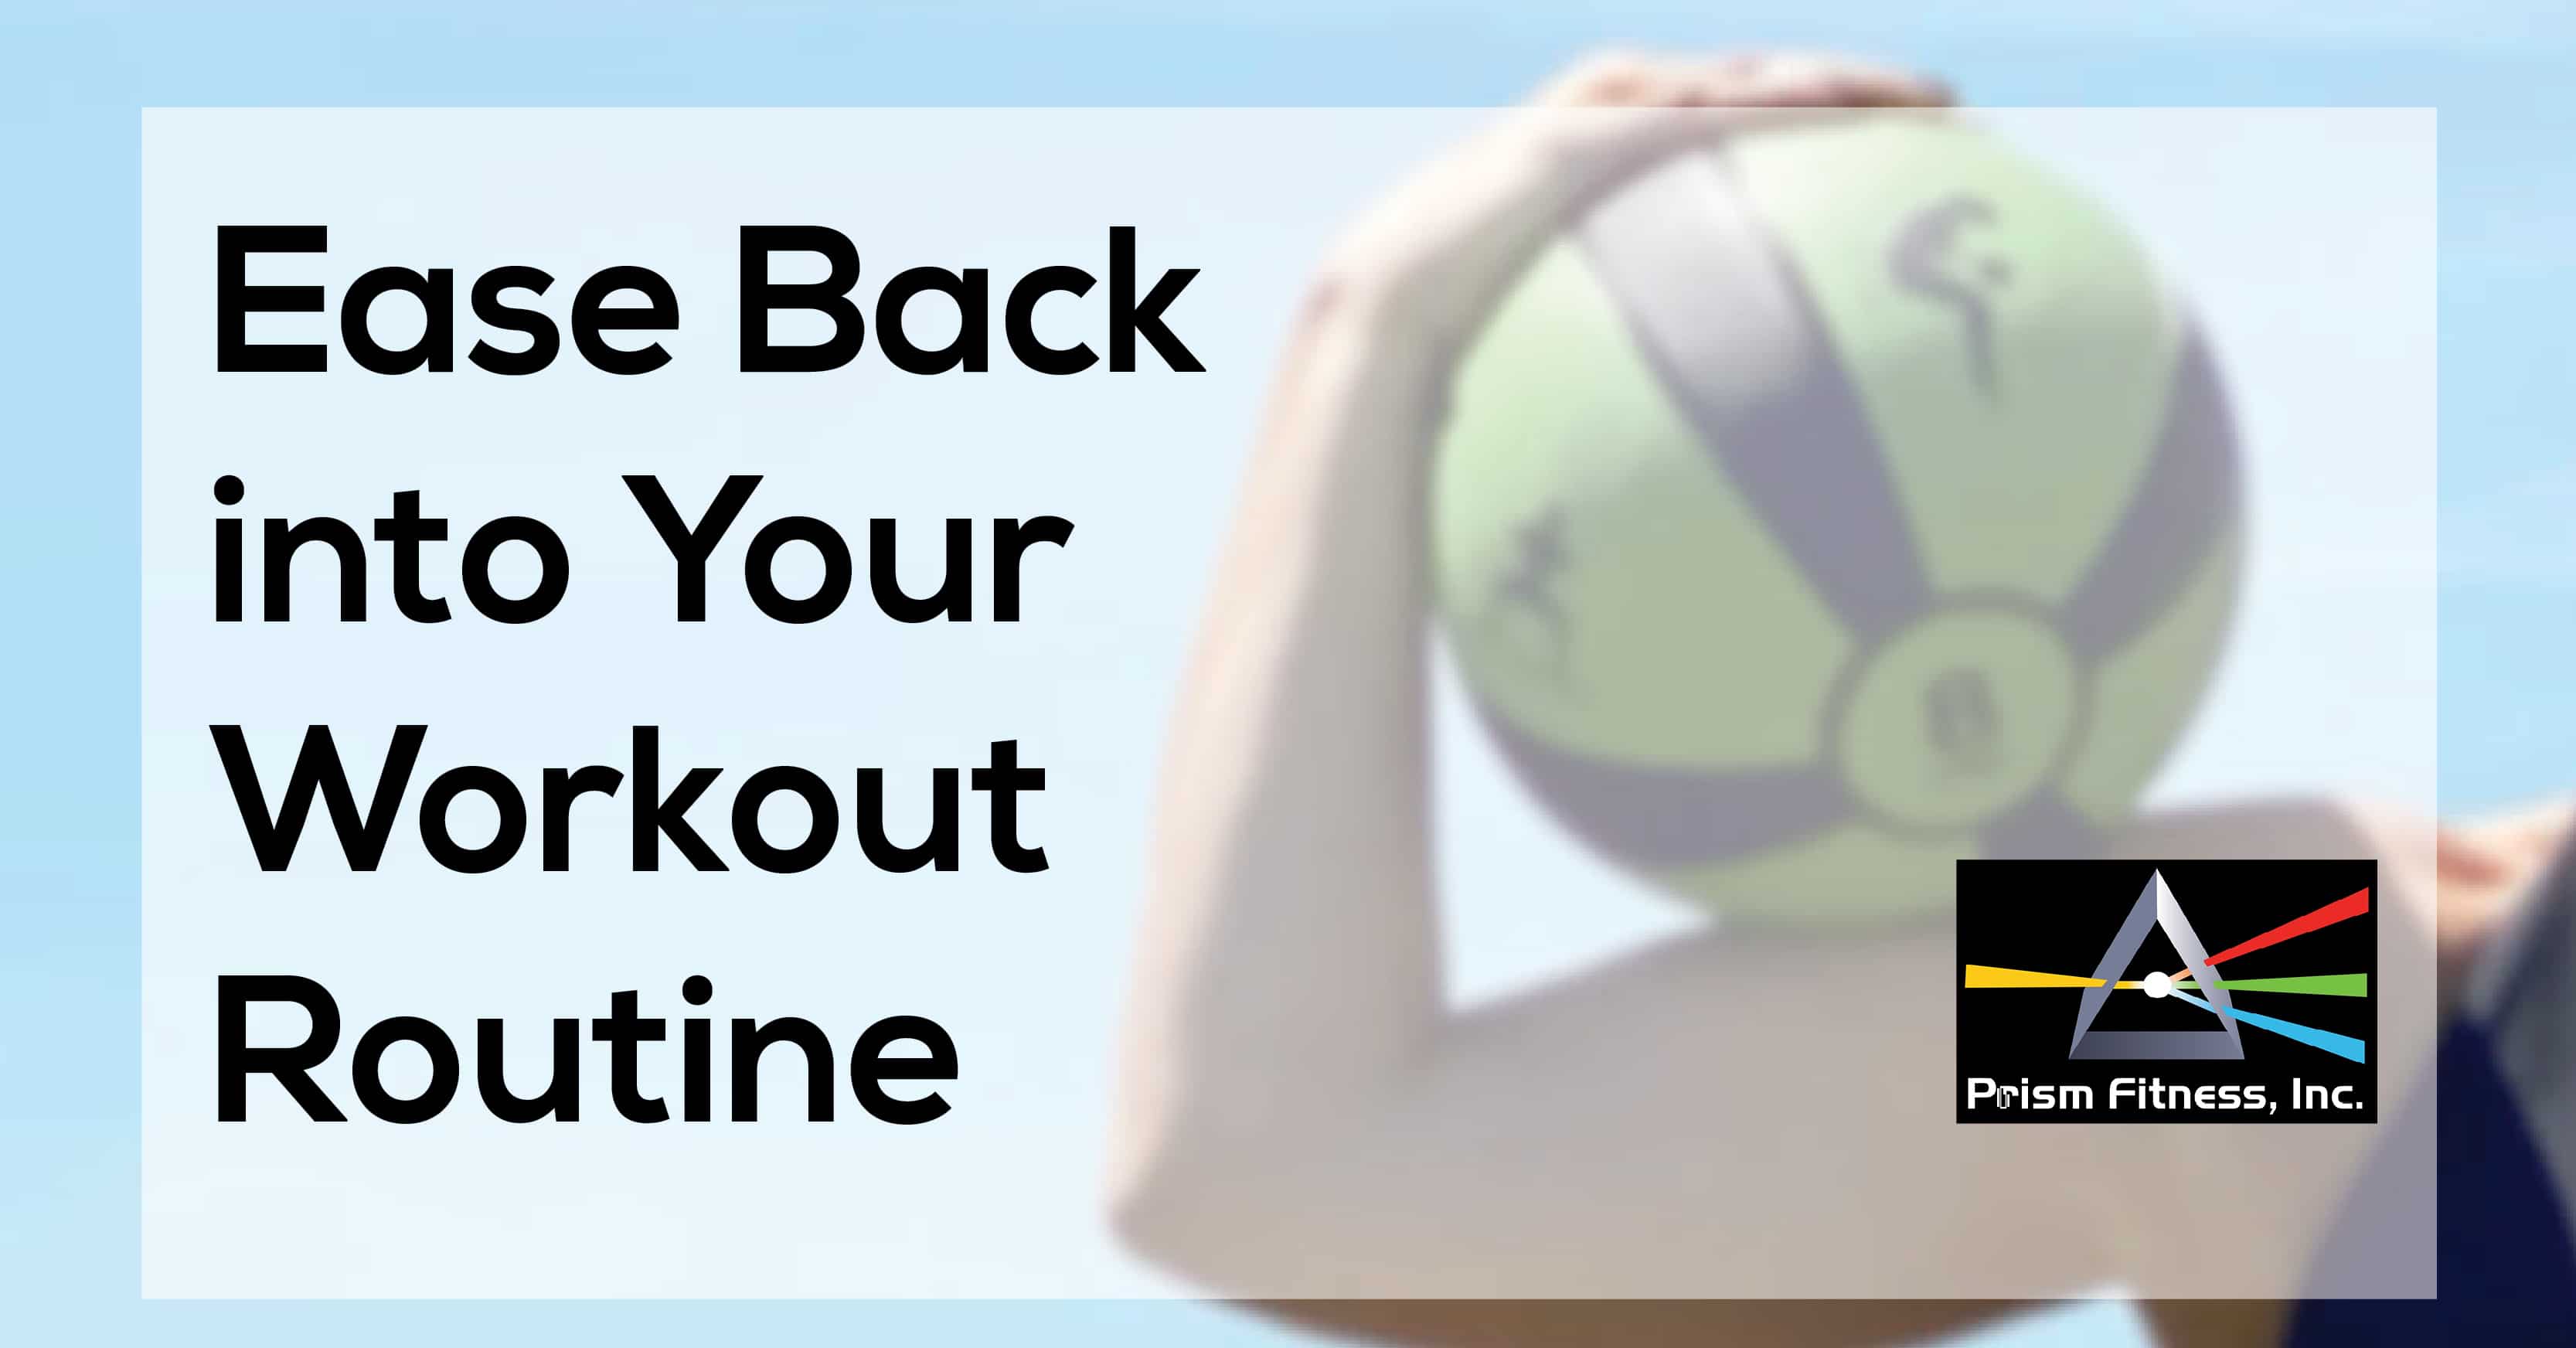 Ease Back Into Your Workout Routine